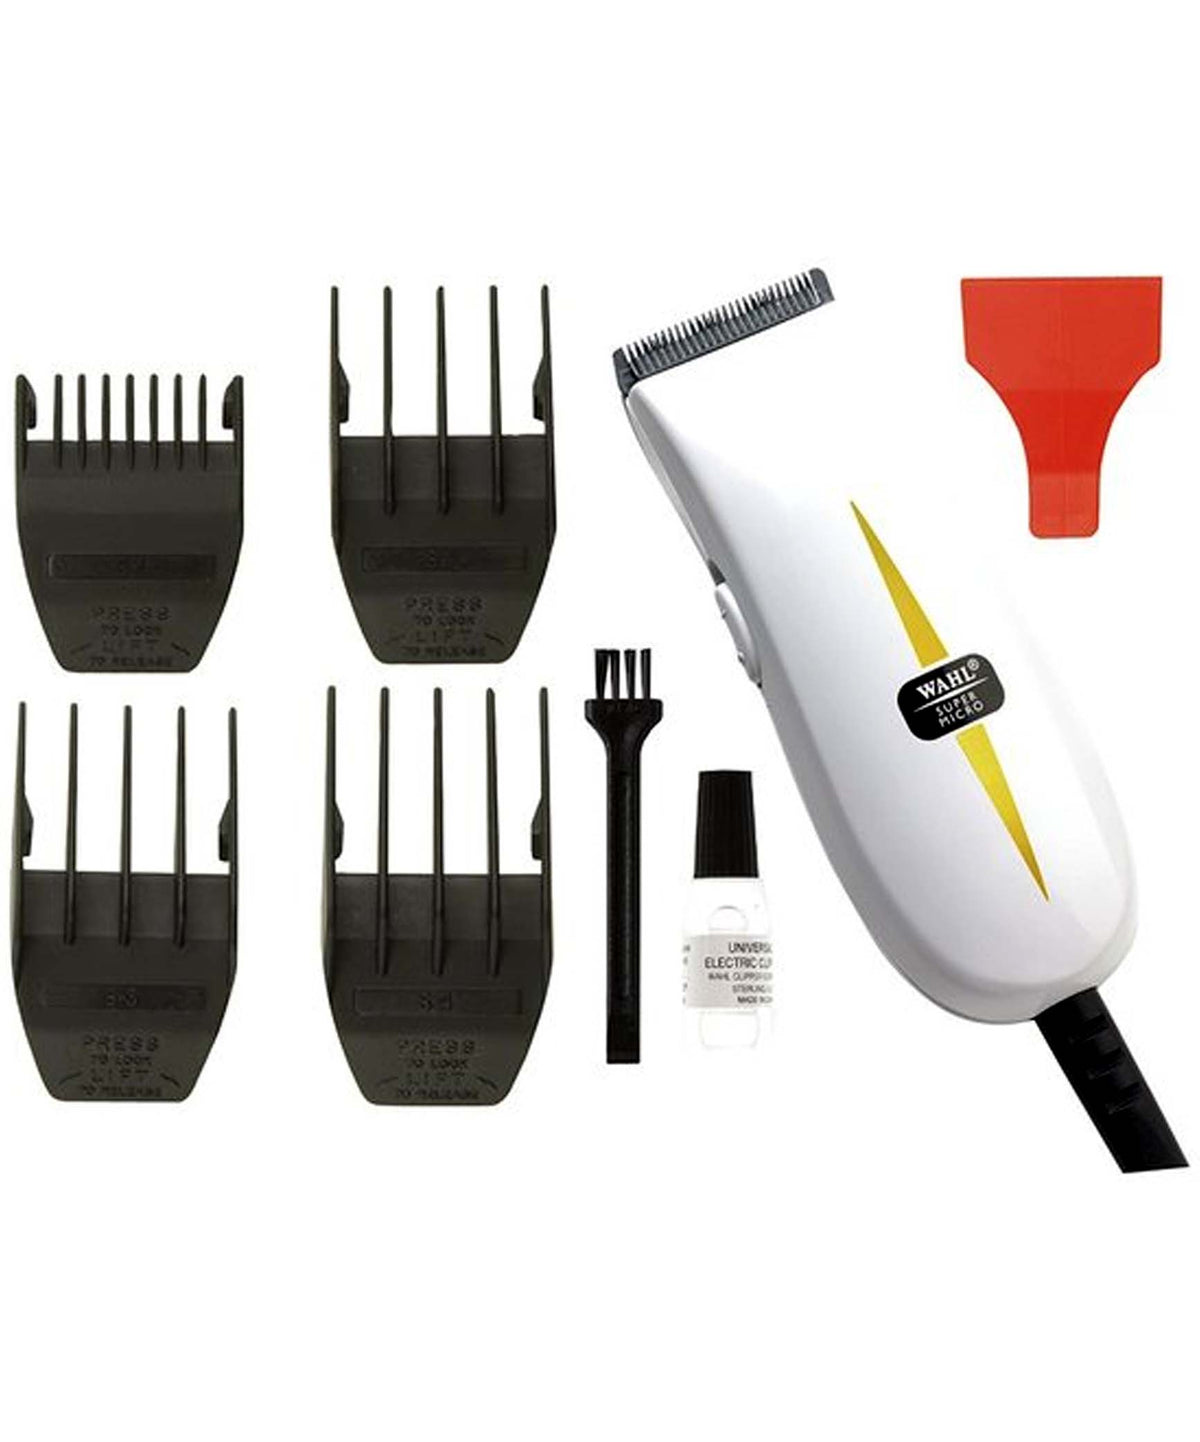 Wahl Super Micro Classic Series Corded Trimmer, 08689-1136